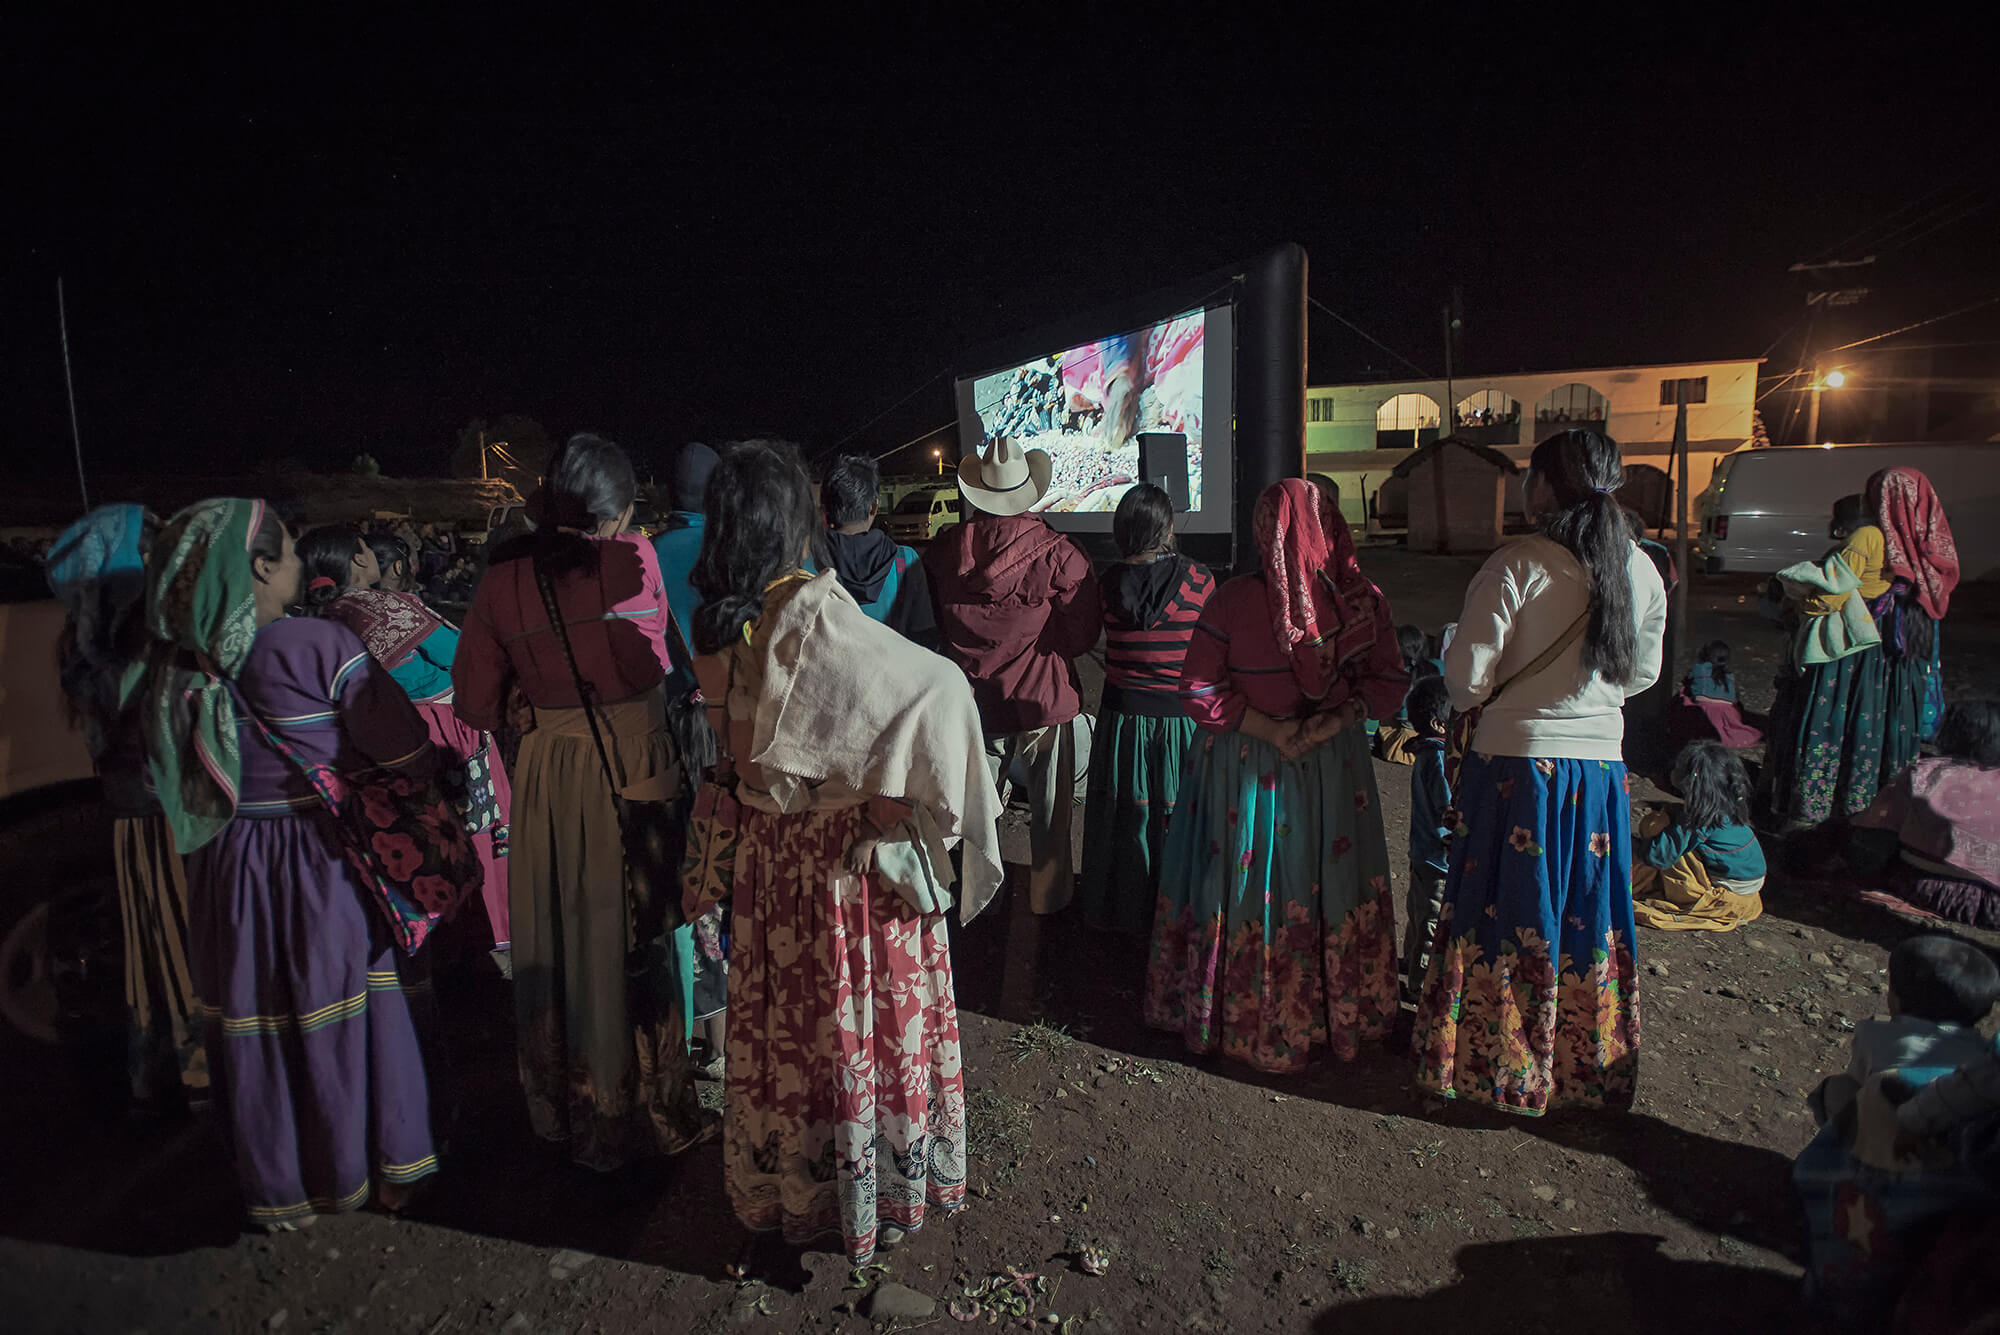 One of the first showings of "Huicholes: The Last Peyote Guardians" was in San Andrés Cohamiata-Tatei Kie, where the elders requested Director Hernán Vílchez to make the film. (Credit: José Andrés Solórzano) 